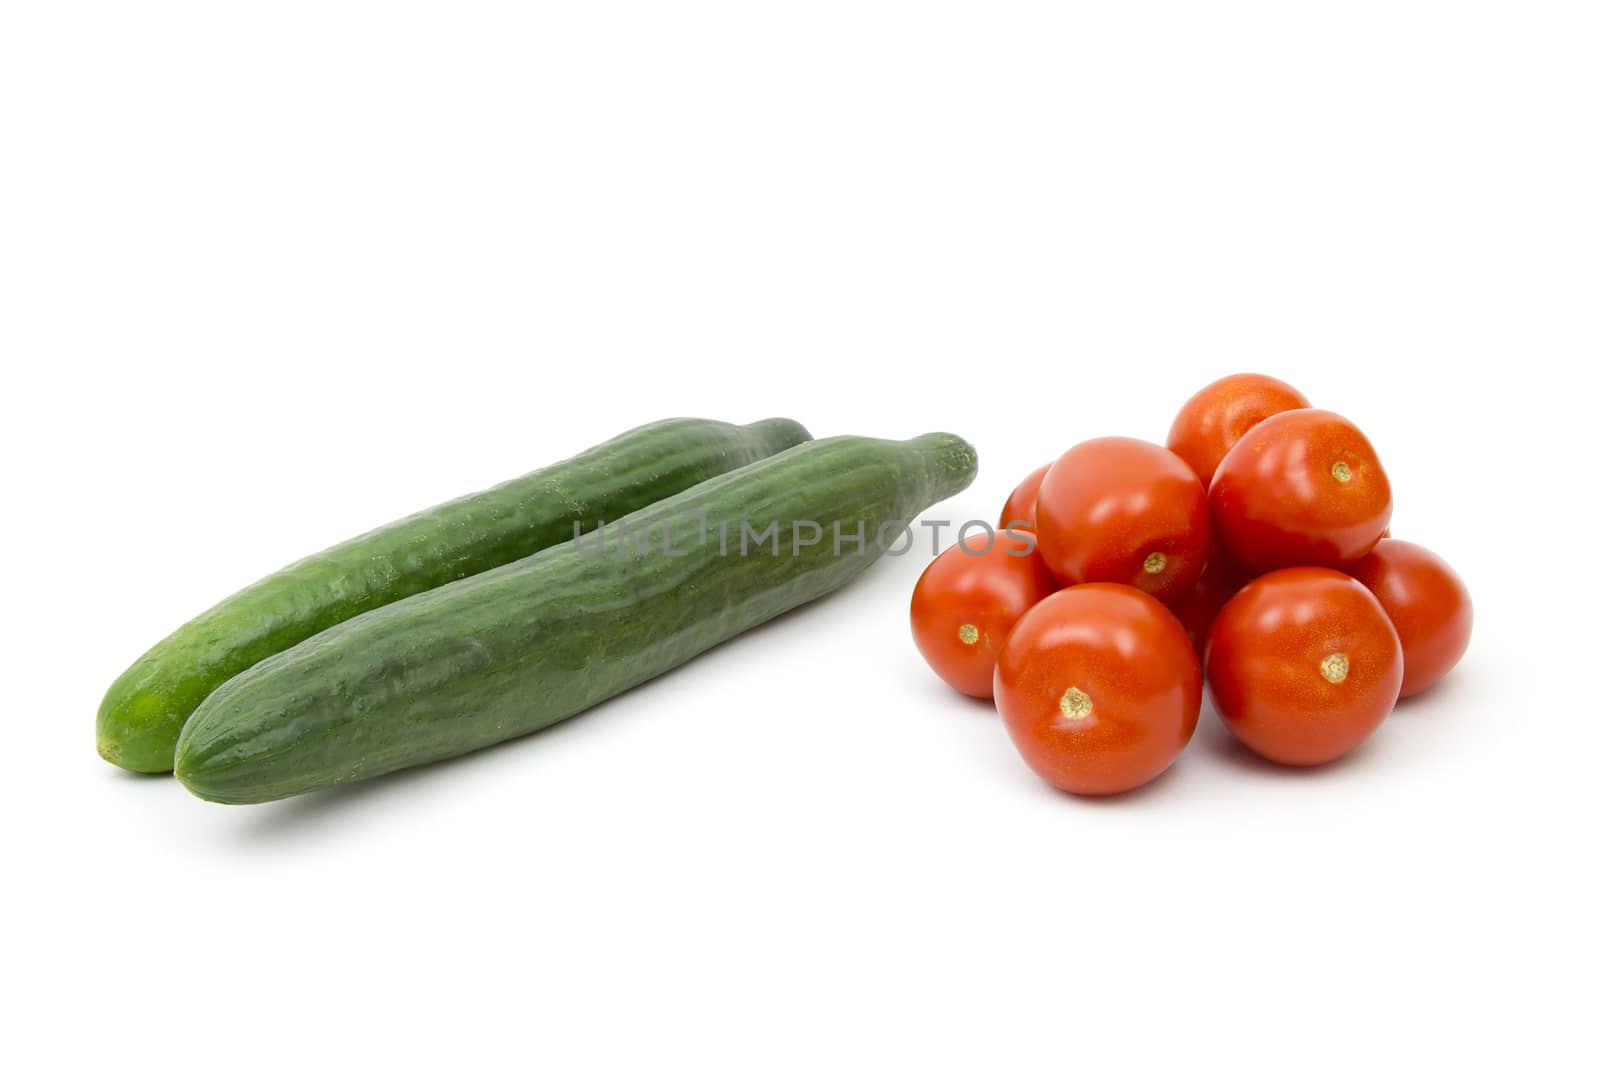 fresh vegetables - tomatoes and cucumbers on white background